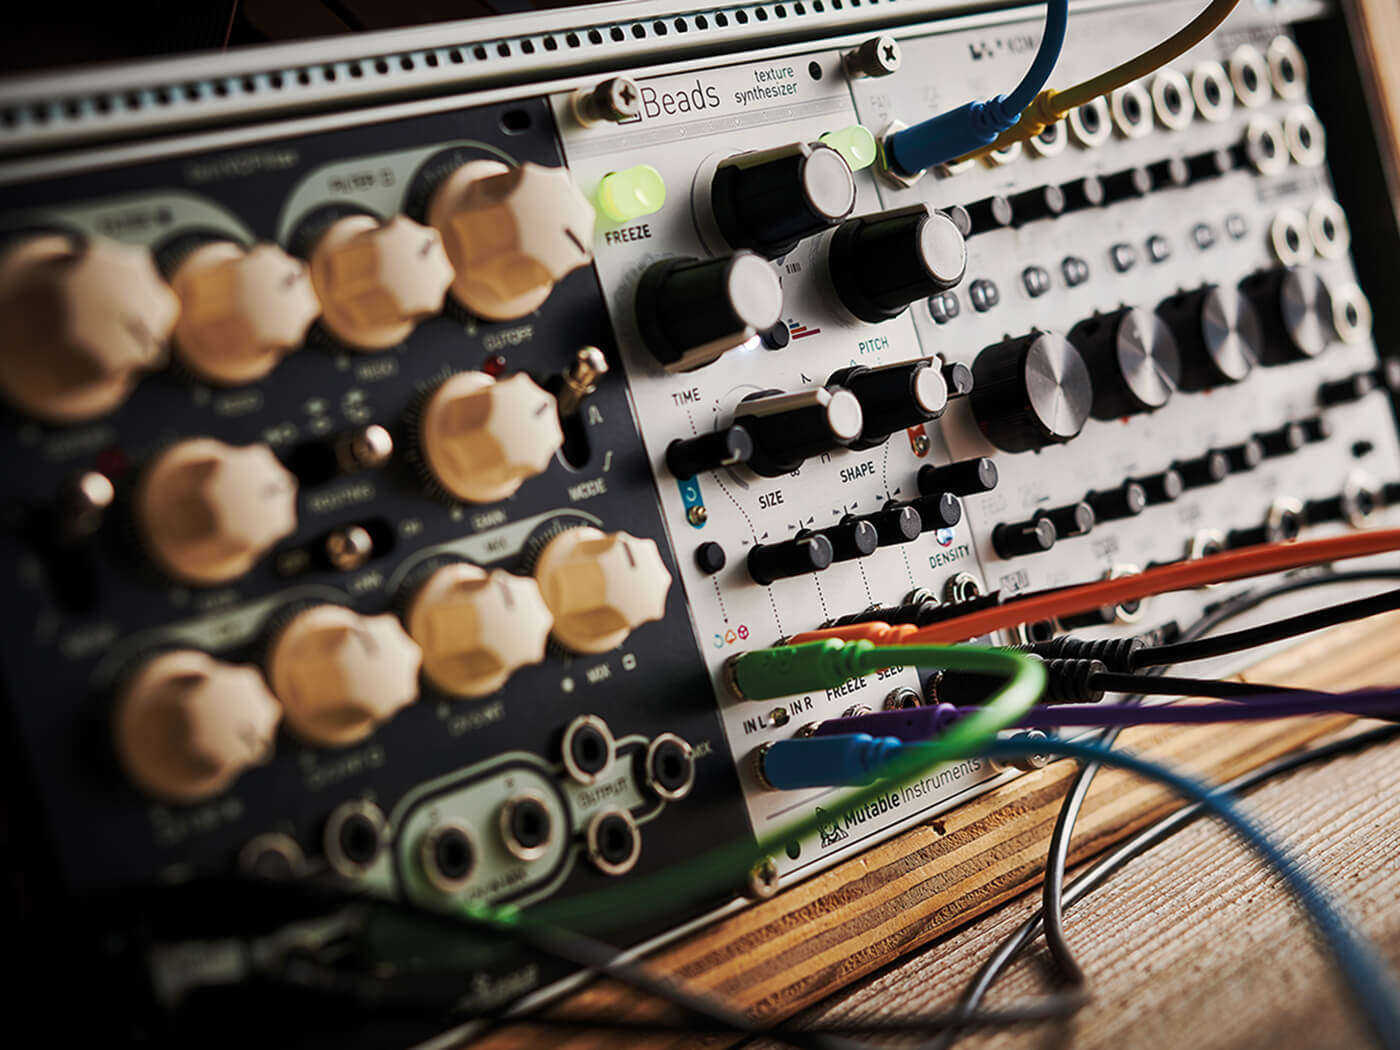 Mutable Instruments Beads synthesizer module, photo by Olly Curtis/Future Publishing via Getty Images